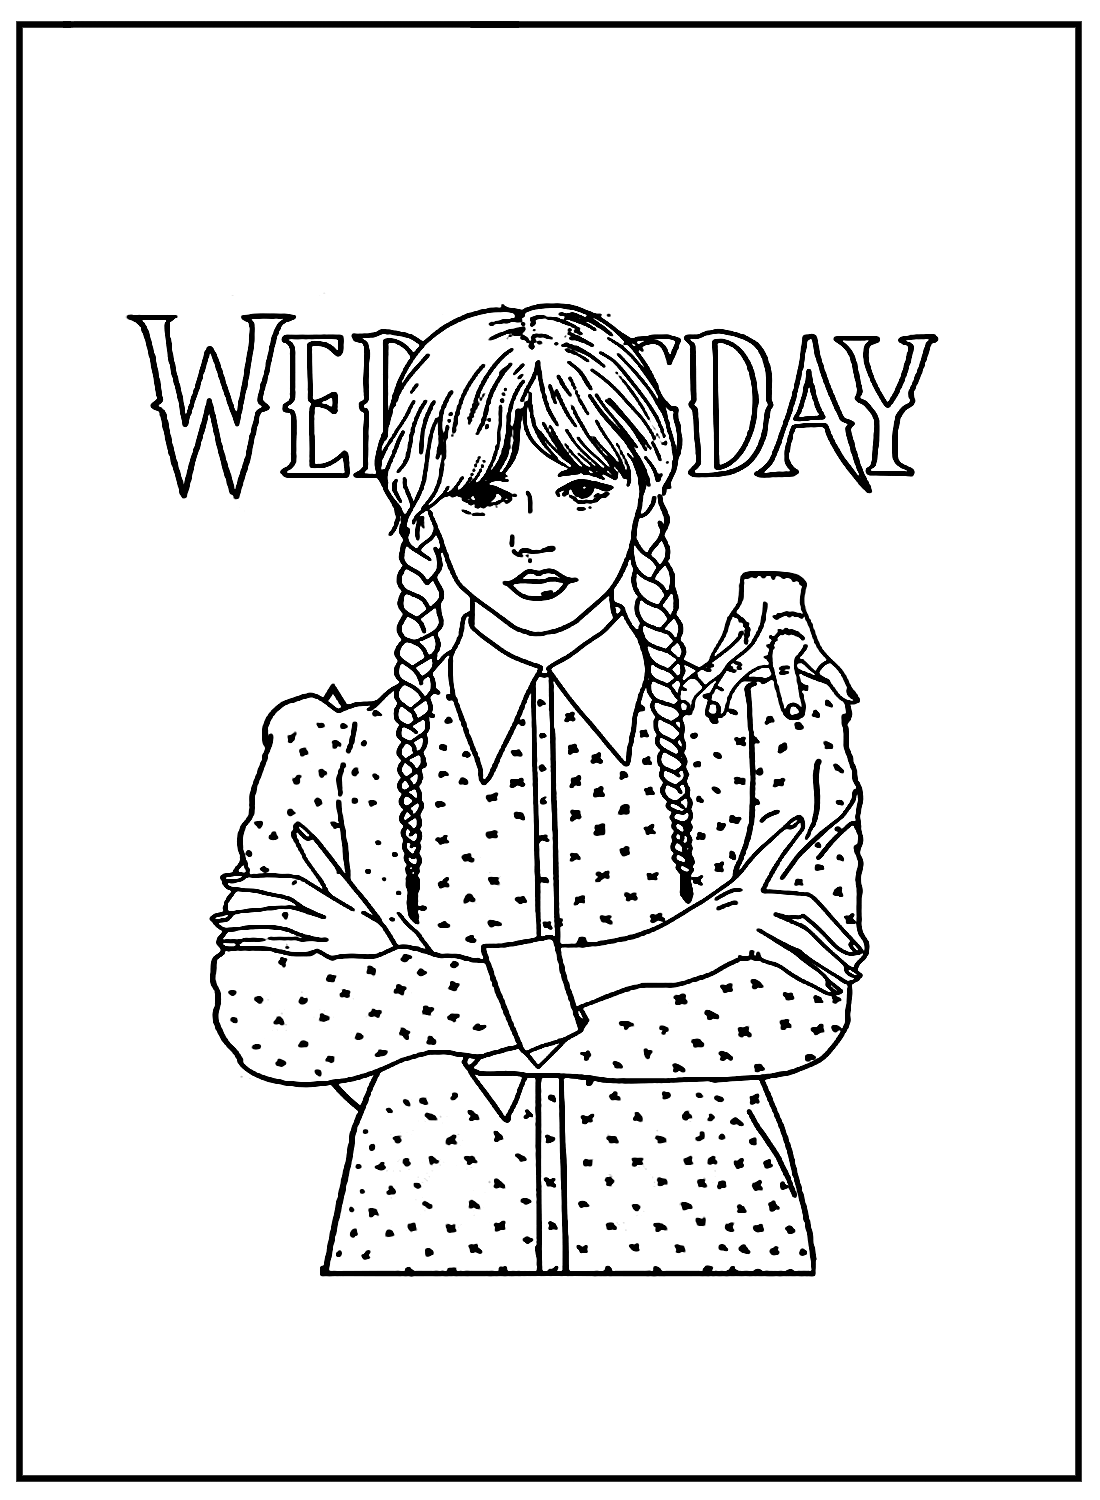 Wednesday Image Coloring Pages - Wednesday Coloring Pages - Coloring Pages  For Kids And Adults